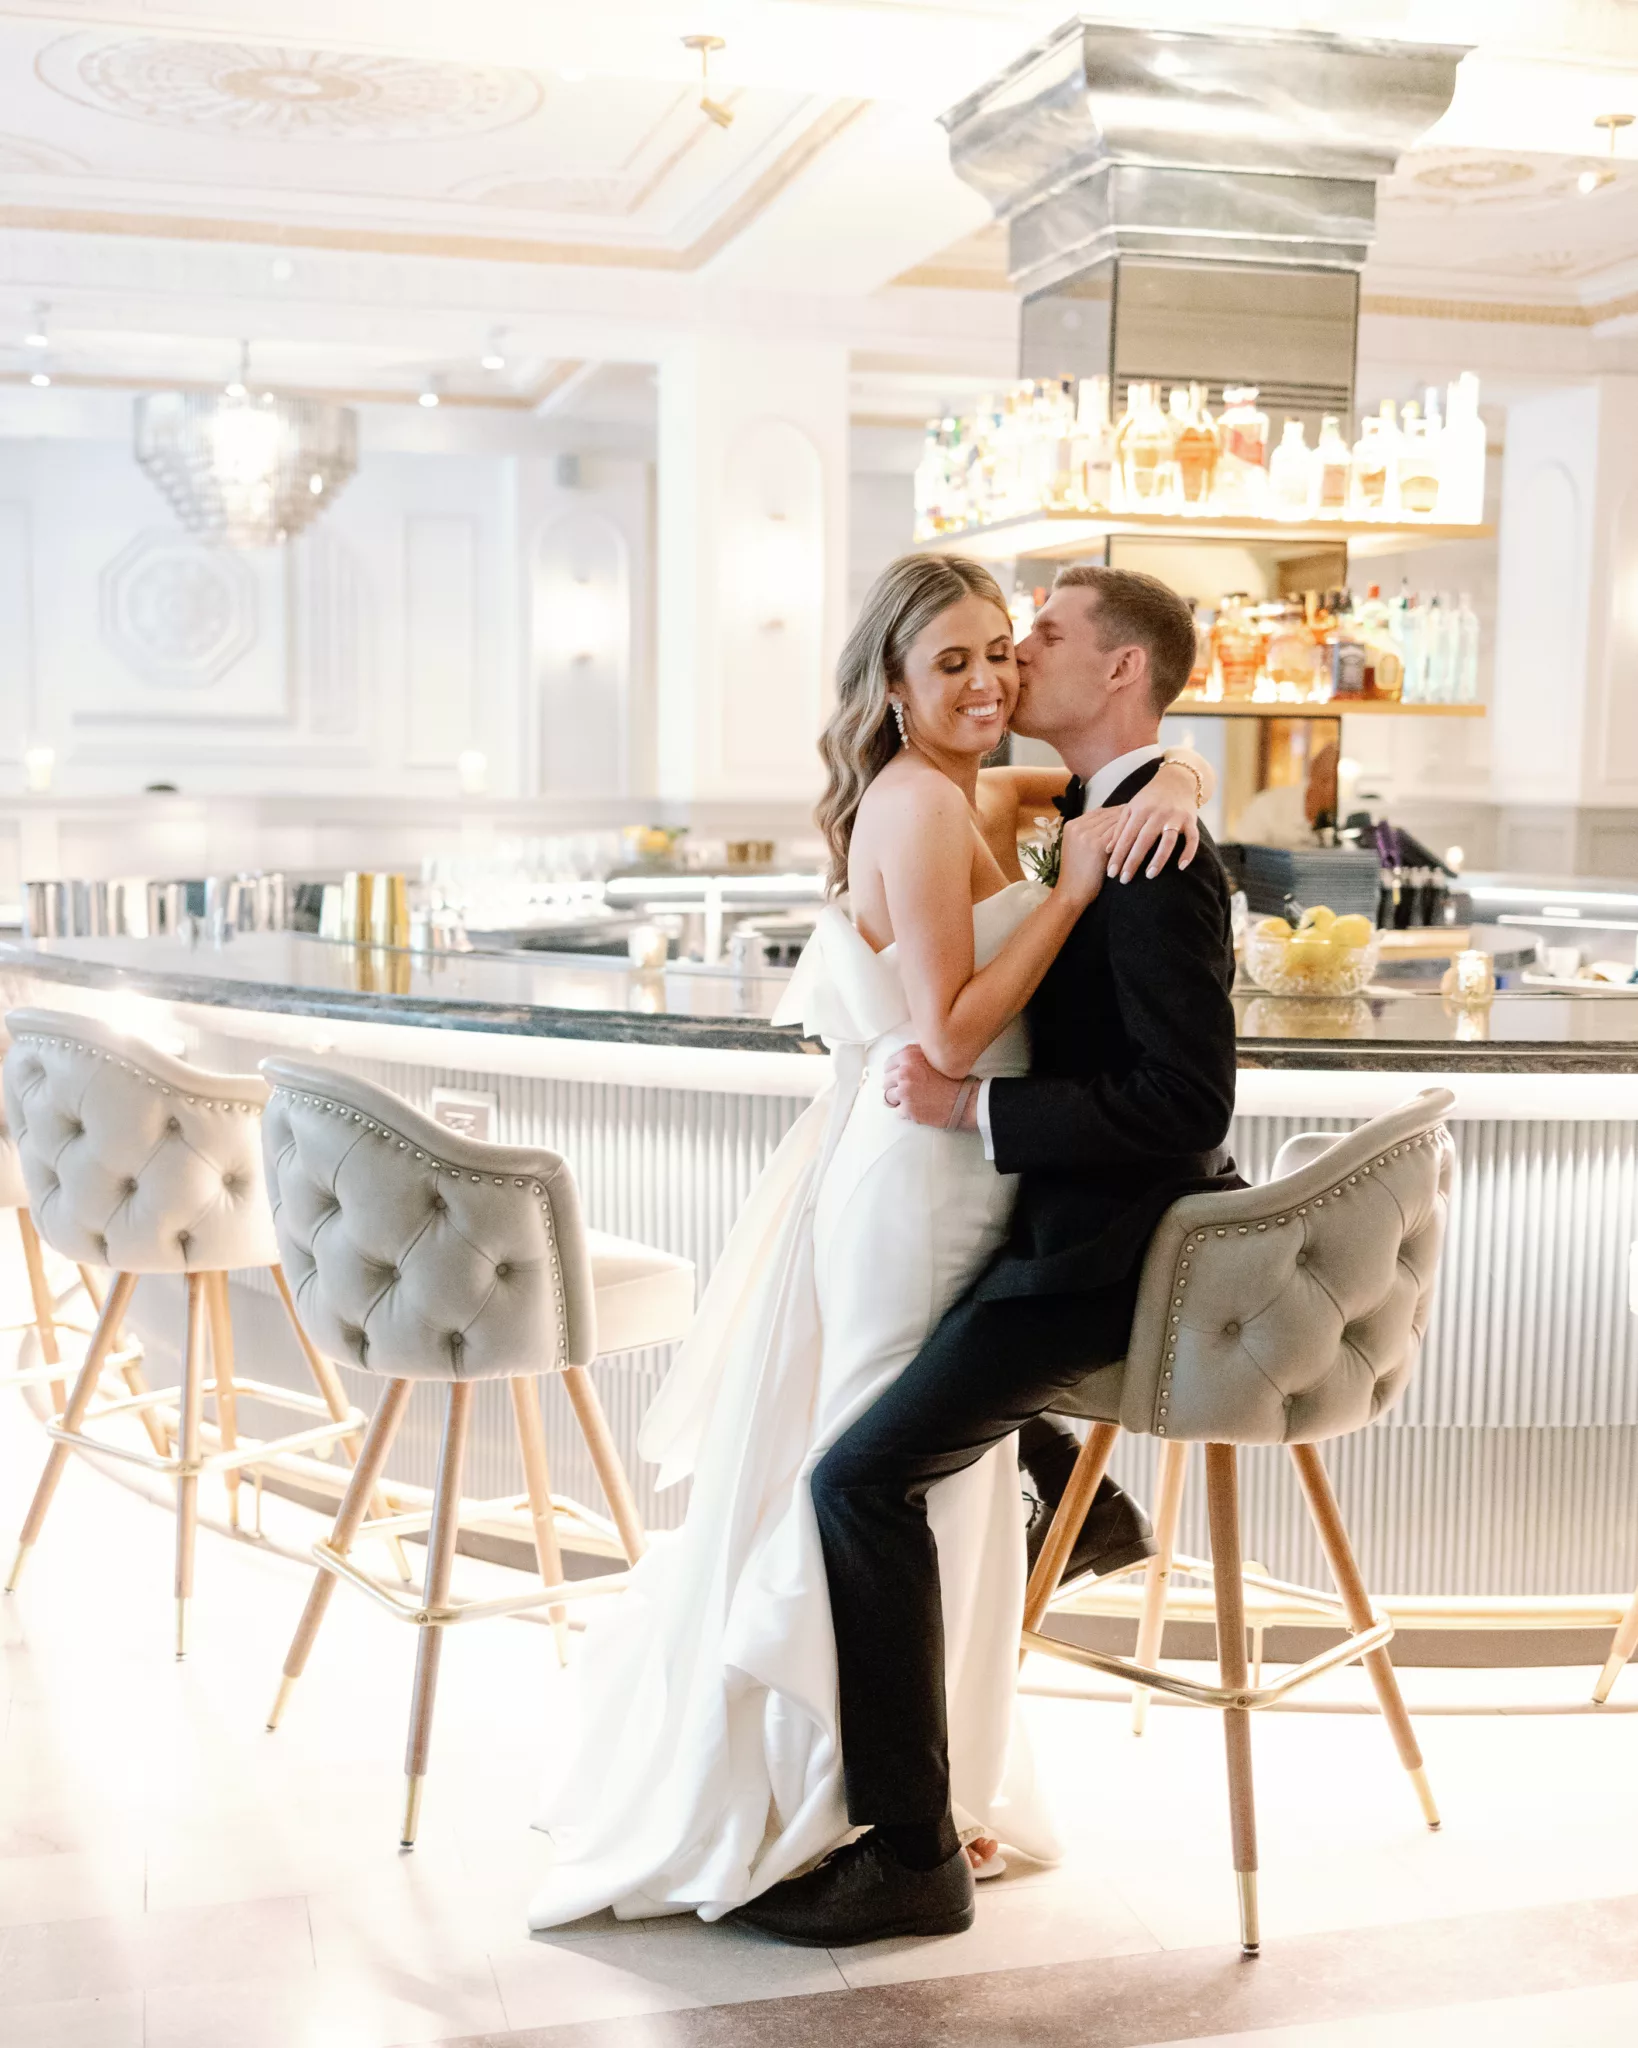 Bride and groom embrace inside chic bar in downtown Des Moines on their wedding day